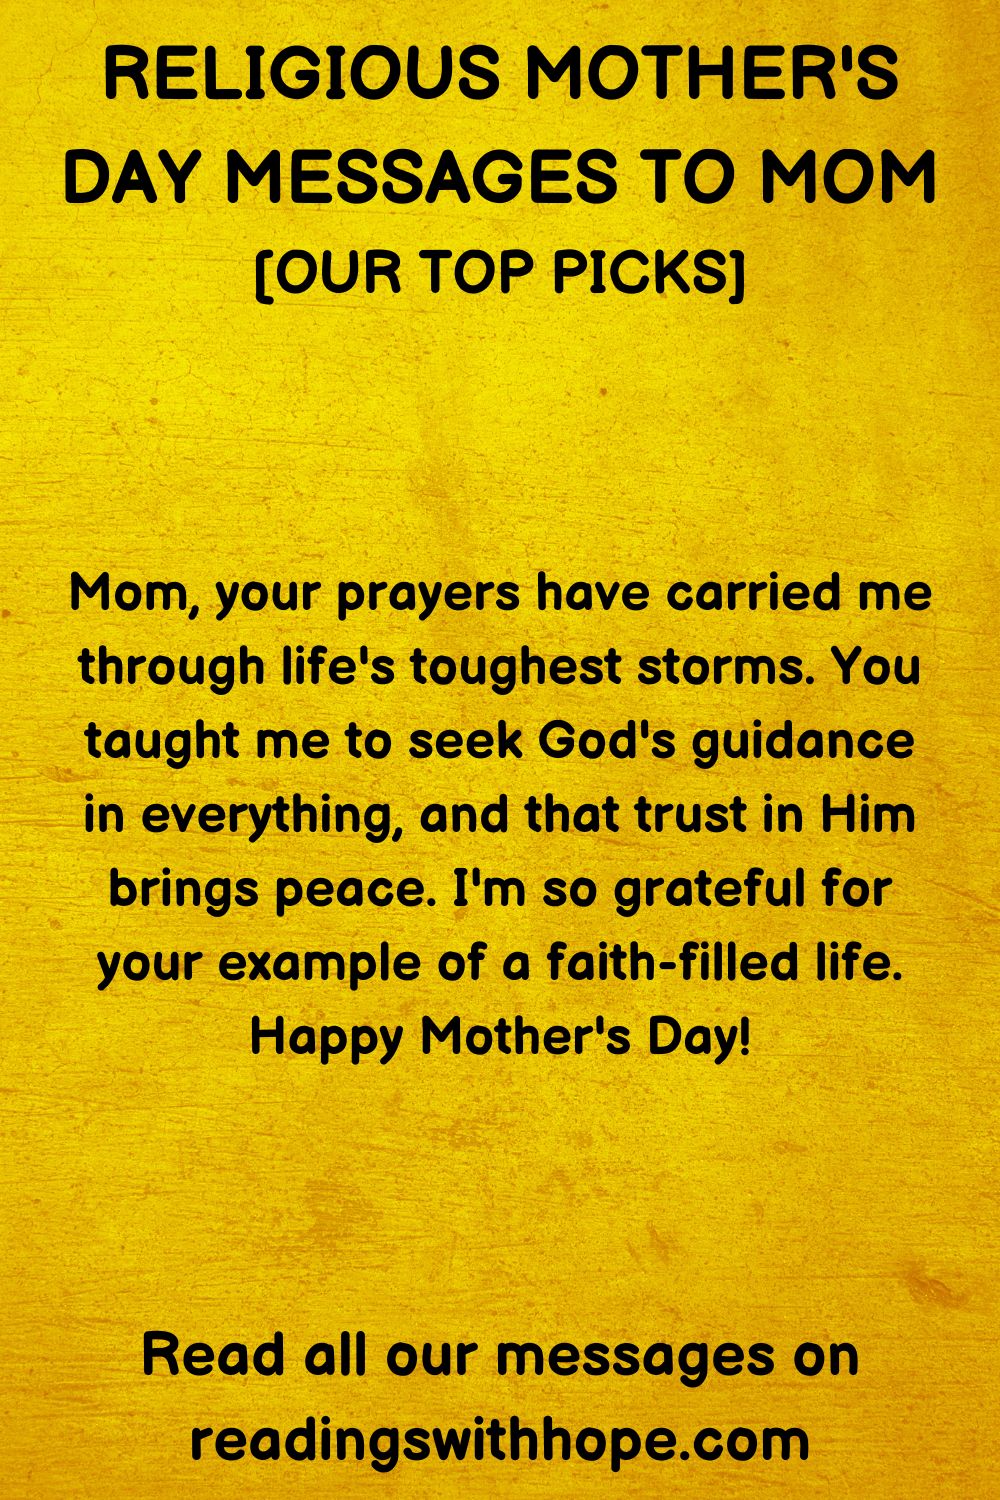 Religious Mother's Day Messages To Mom
